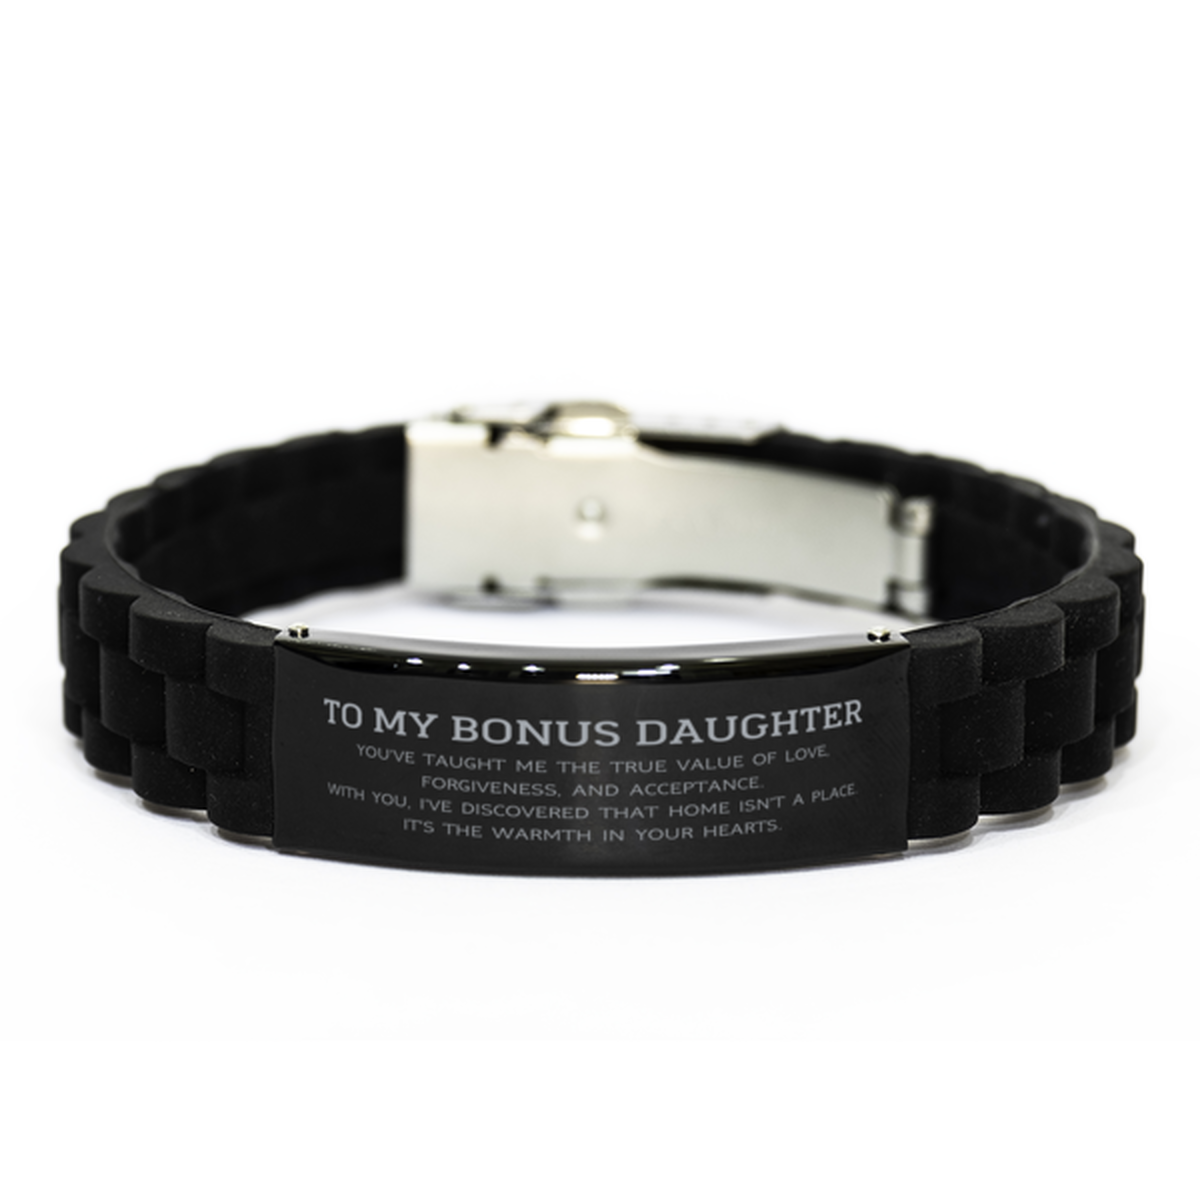 To My Bonus Daughter Gifts, You've taught me the true value of love, Thank You Gifts For Bonus Daughter, Birthday Black Glidelock Clasp Bracelet For Bonus Daughter